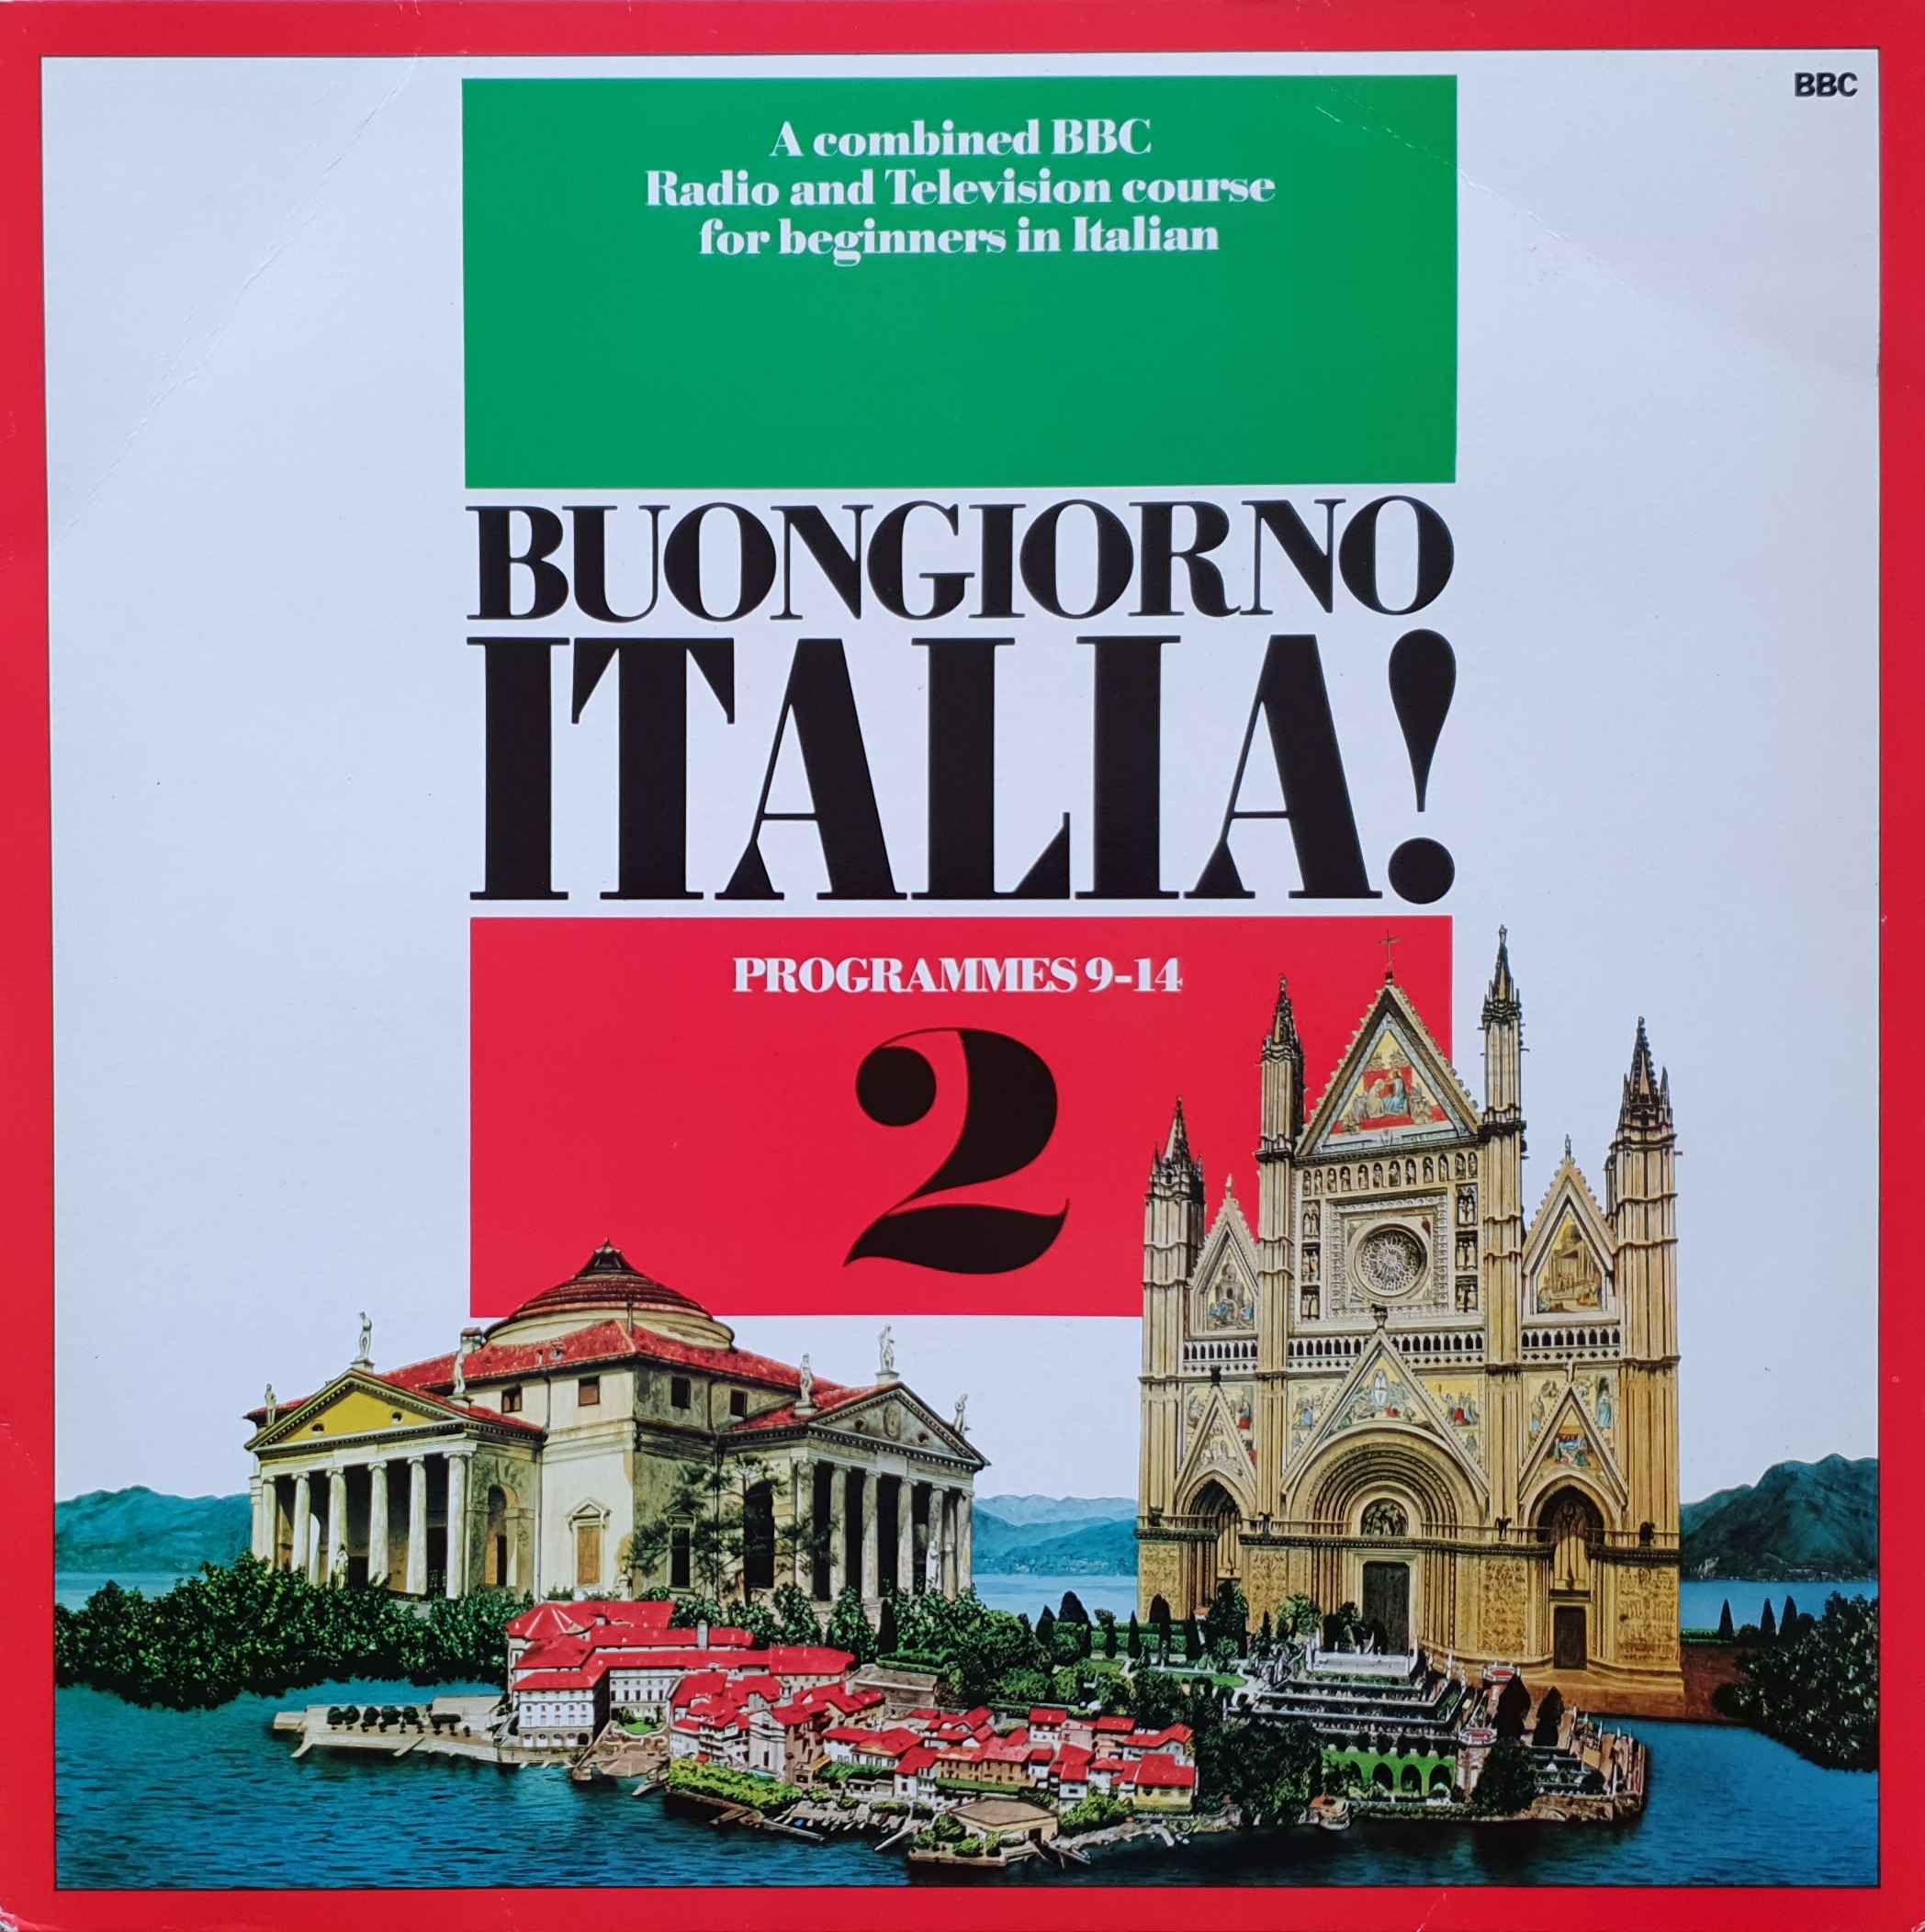 Picture of OP 261 Buongiorno Italia - 9-14 by artist Maddalena Fagandini / Antonietta Terry / Alan Wilding from the BBC albums - Records and Tapes library